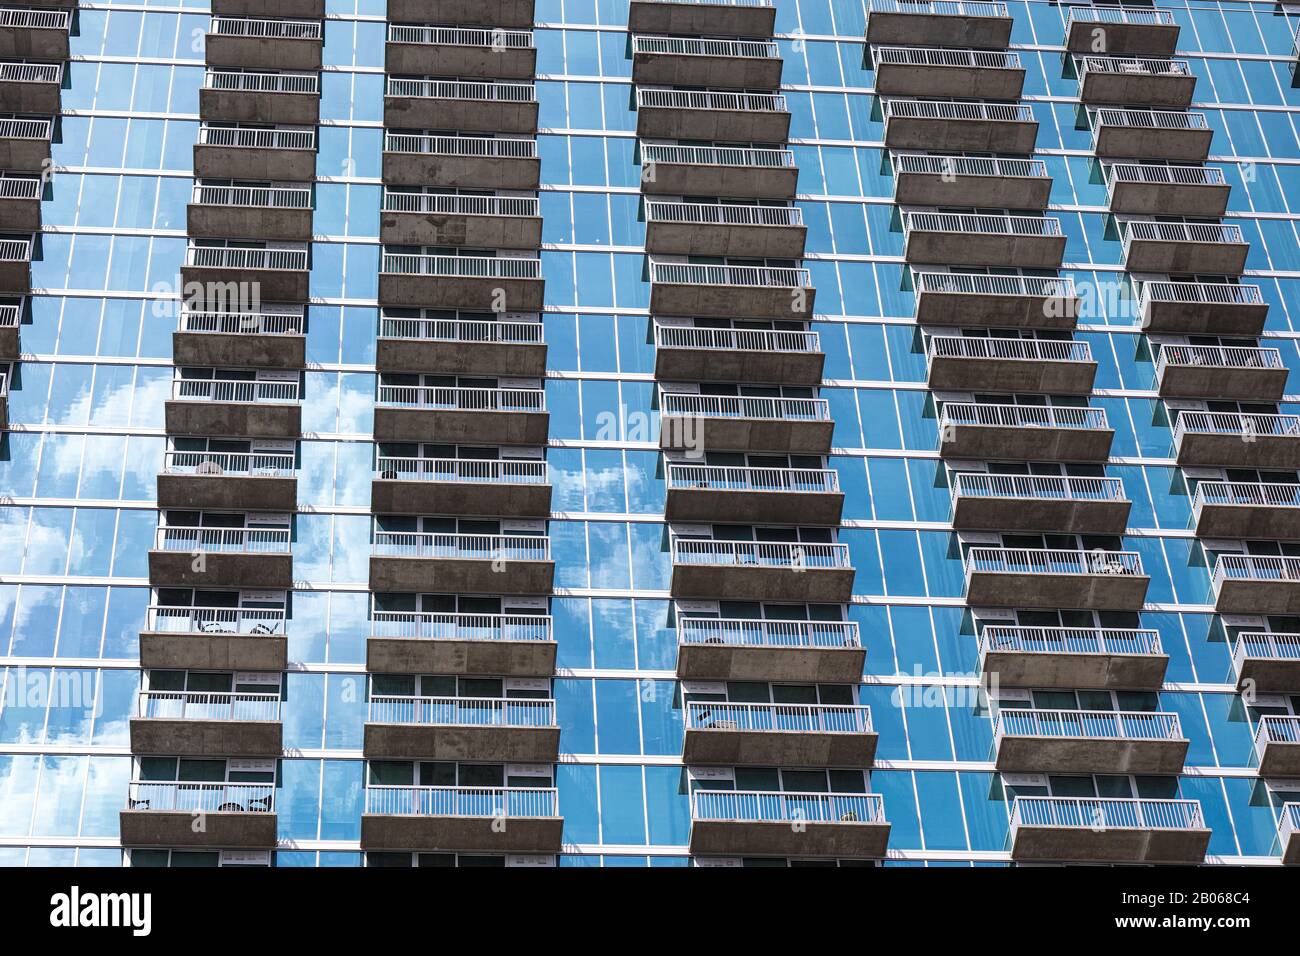 Rows of balconies forming a repetitive pattern on the facade of the modern high rise building made out of the blue glass with sky reflection on it Stock Photo